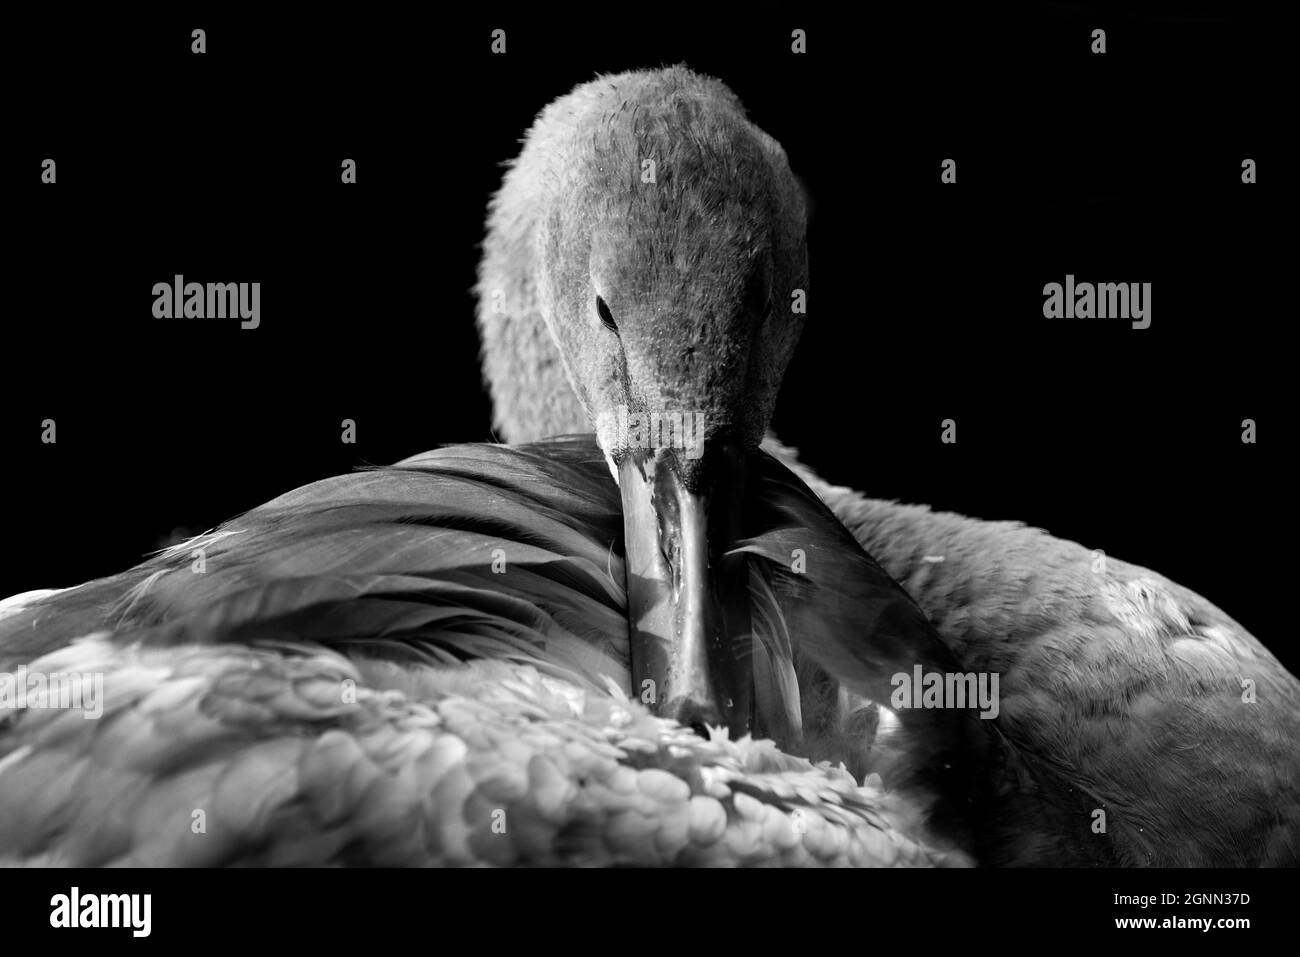 Close up of a young baby swan or Cygnet isolated on a black background Stock Photo